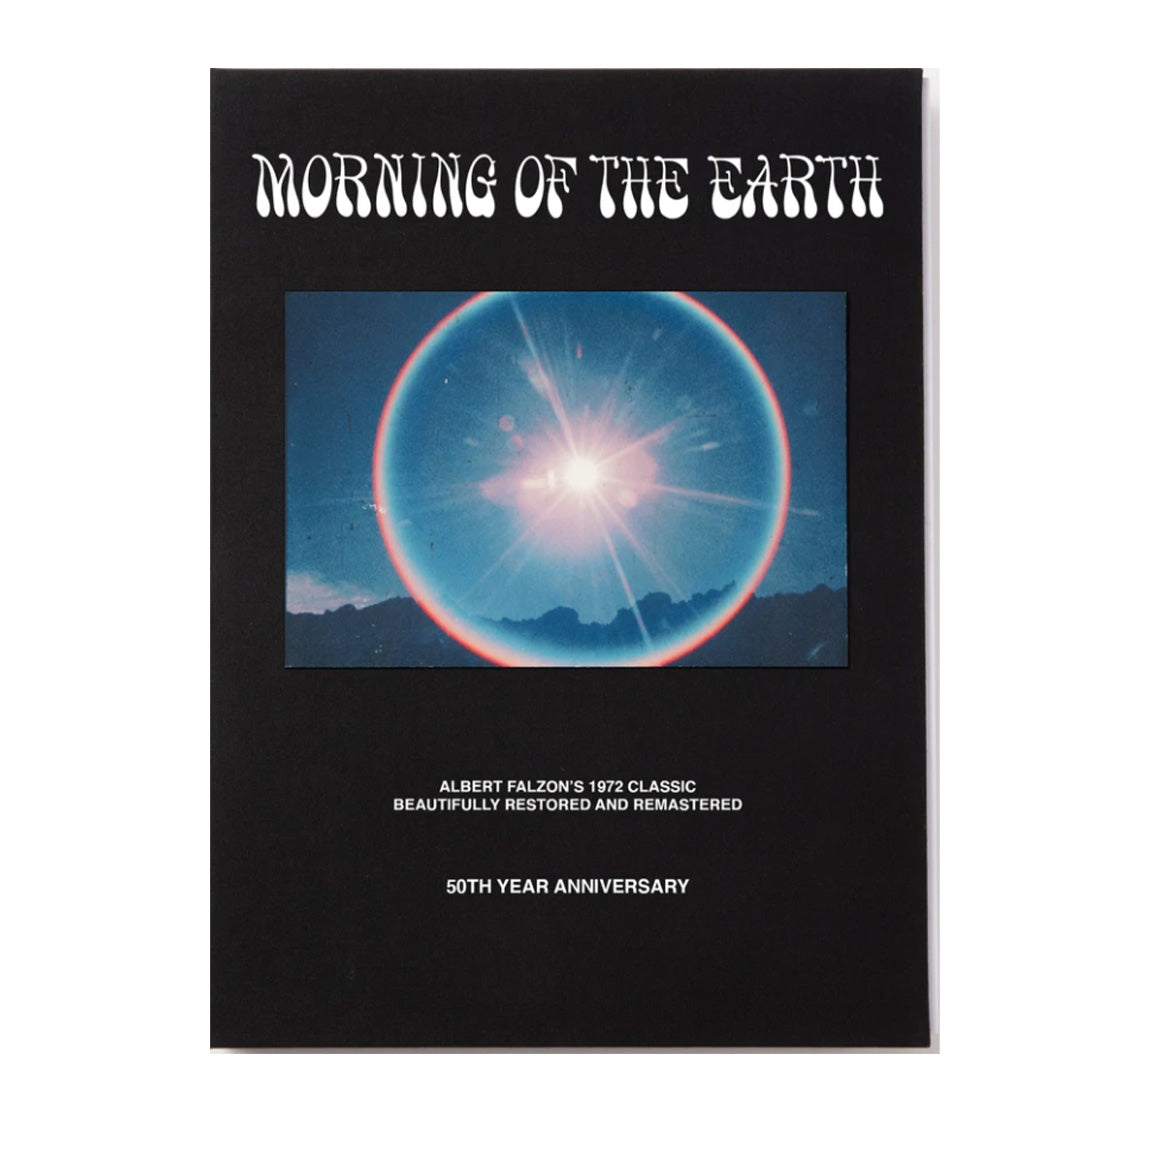 MORNING OF THE EARTH 50TH ANNIVERSARY BOOK